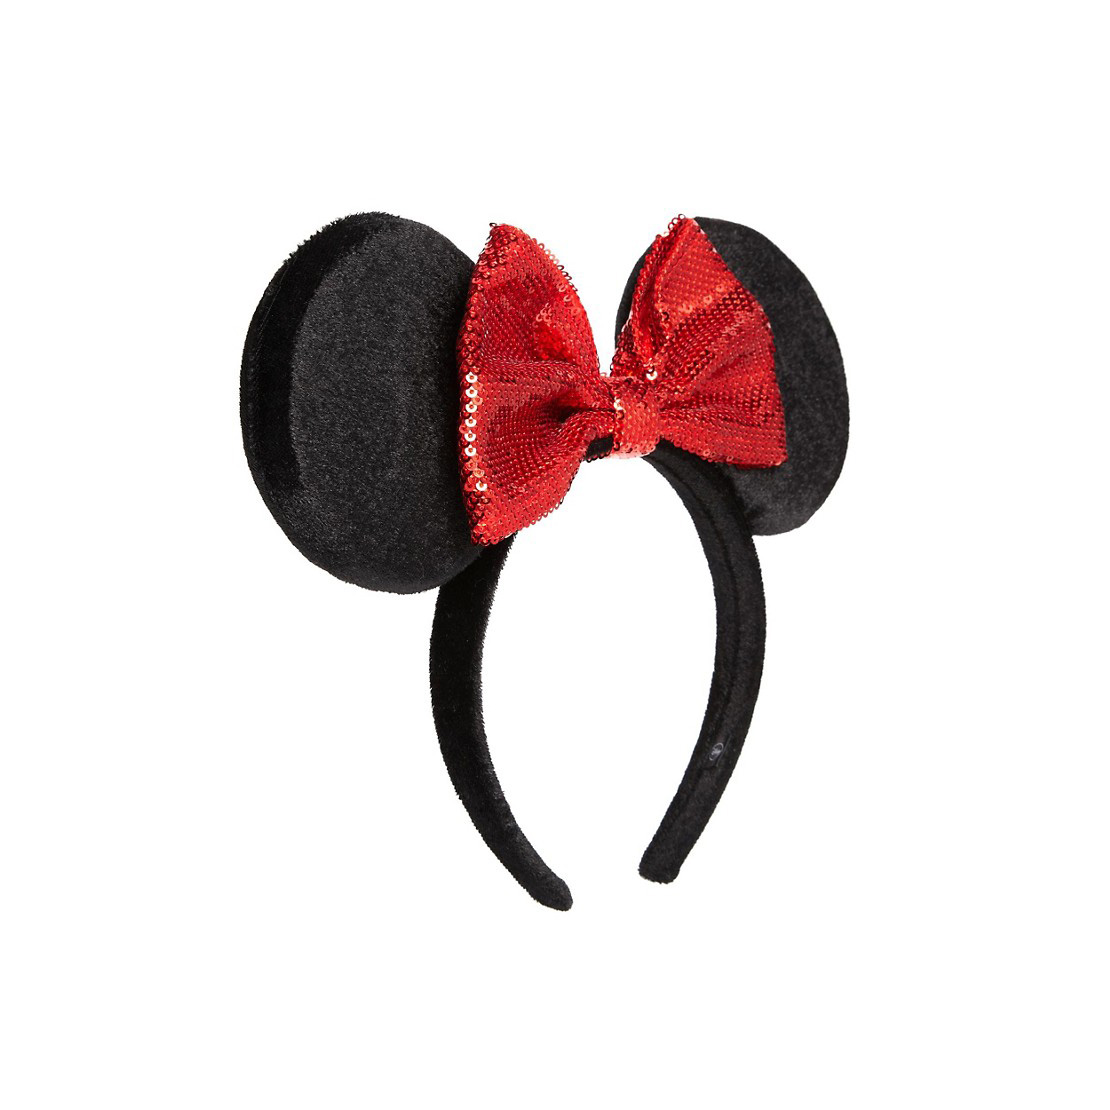 Disney Minnie Mouse Plush Ears With Sequin Bow Aliceband image